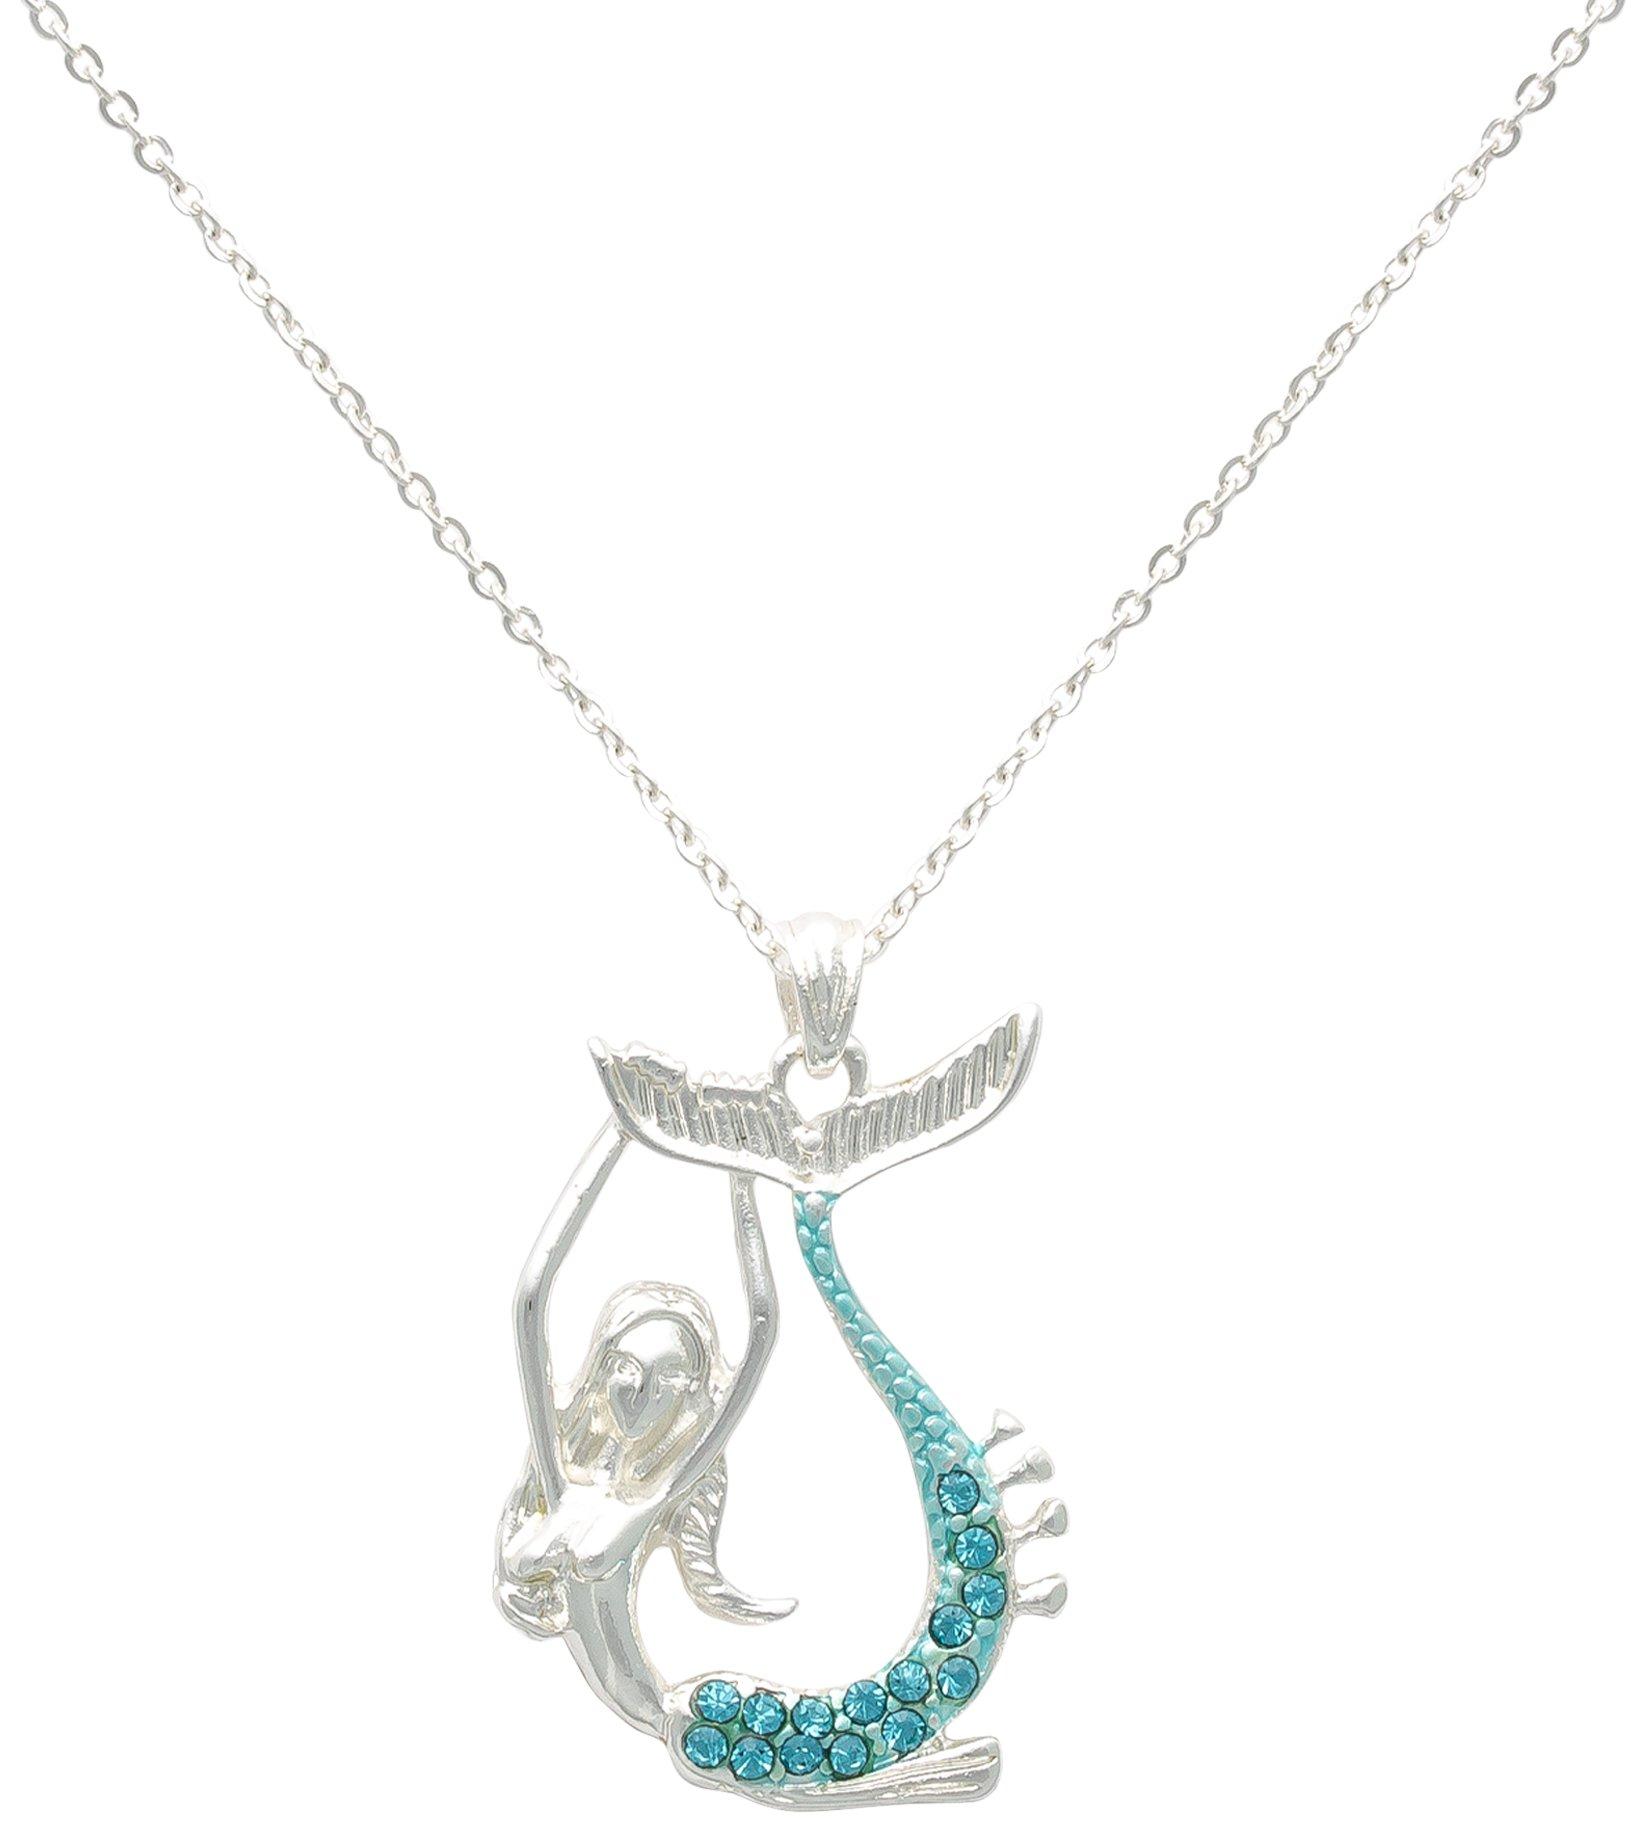 18 In. Pave Mermaid Chain Necklace